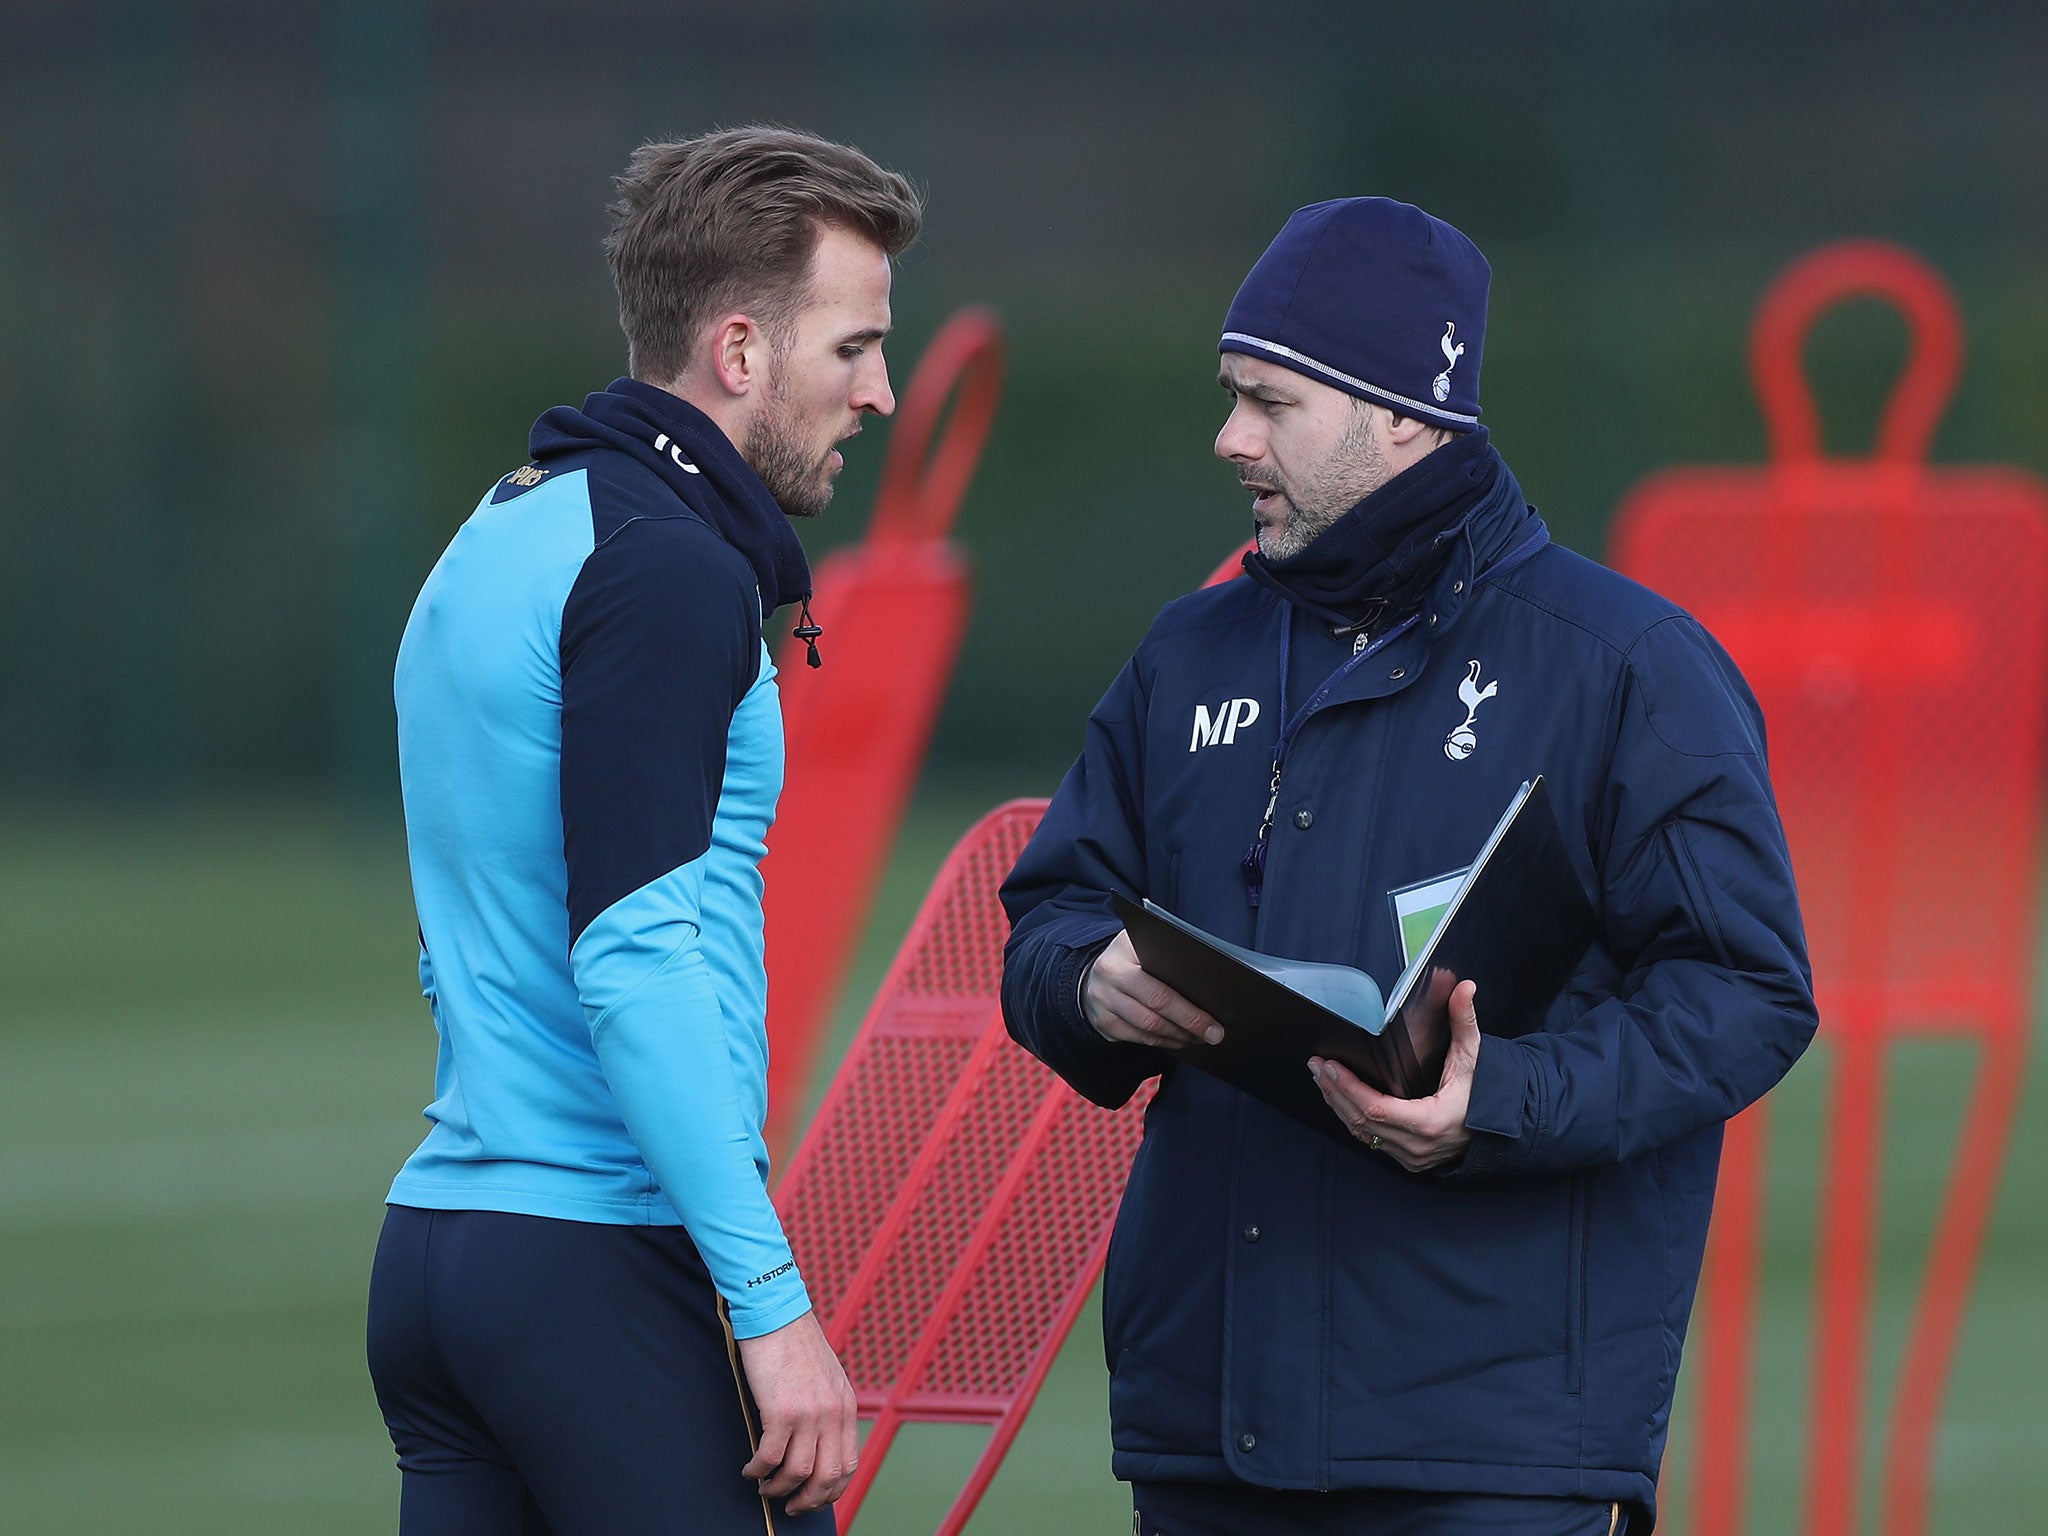 Kane and Pochettino in training together ahead of Saturday's game against Everton